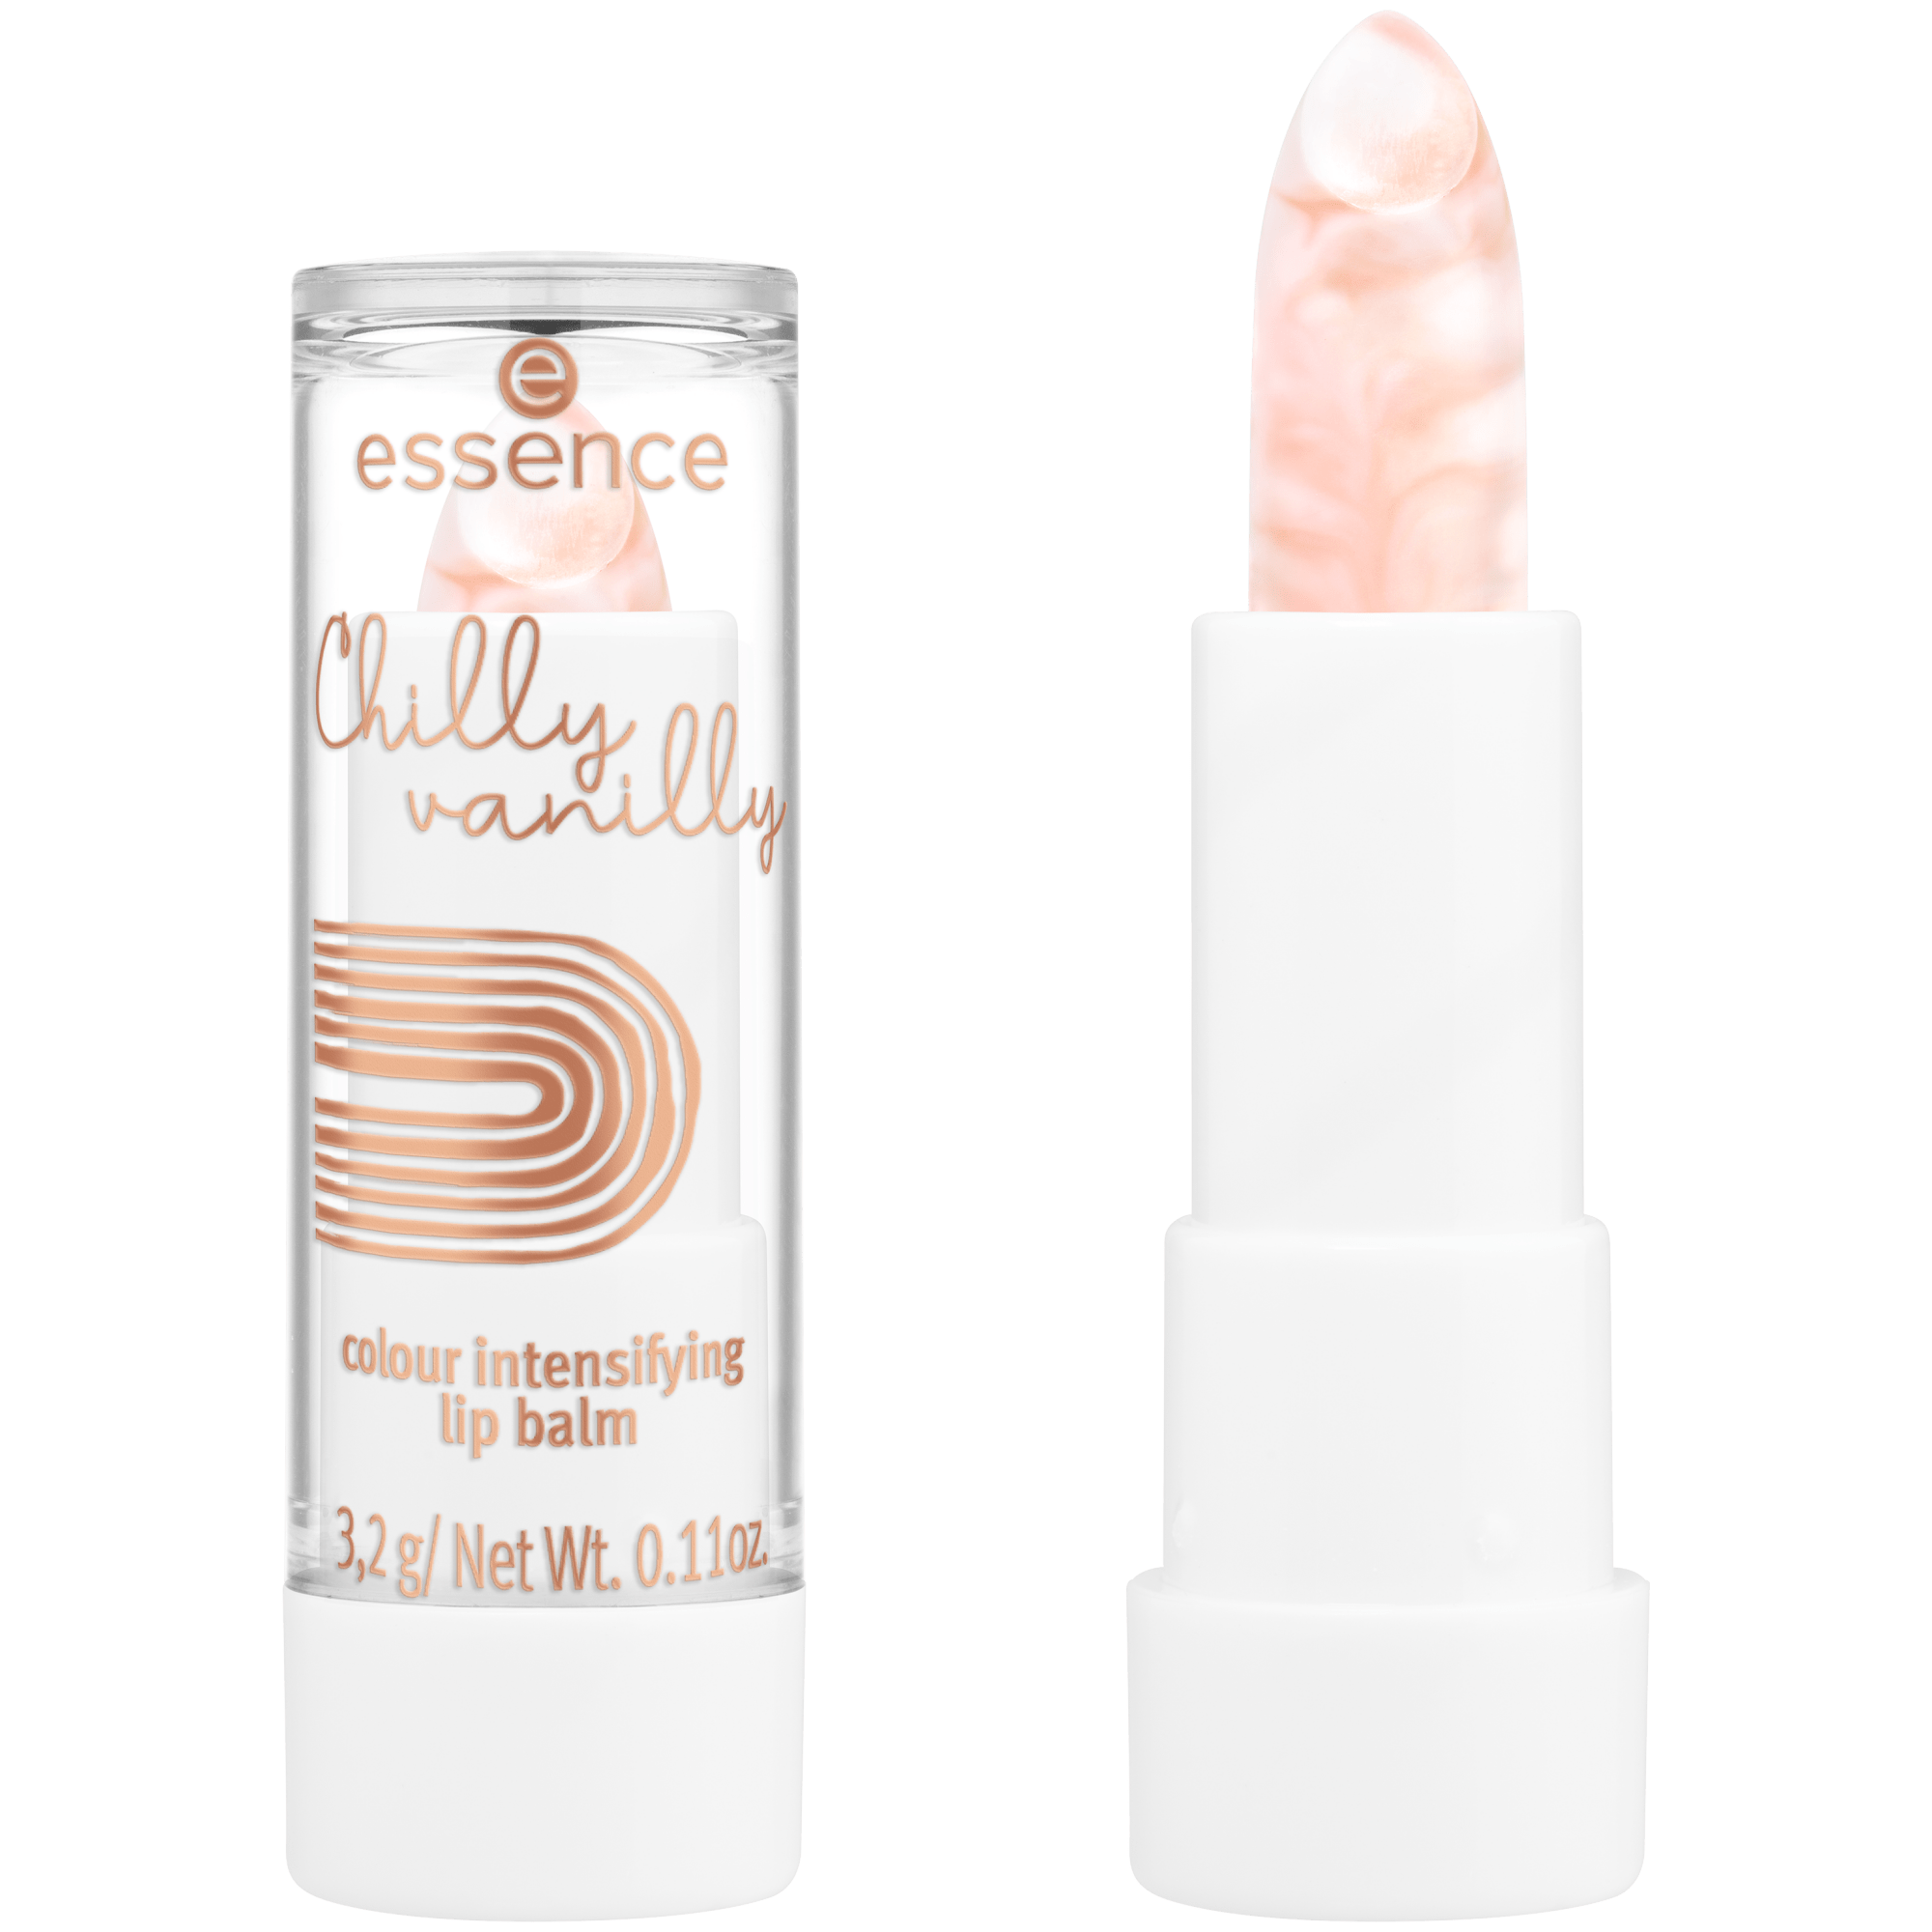 essence-Chilly-vanilly-colour-intensifying-lip-balm-01